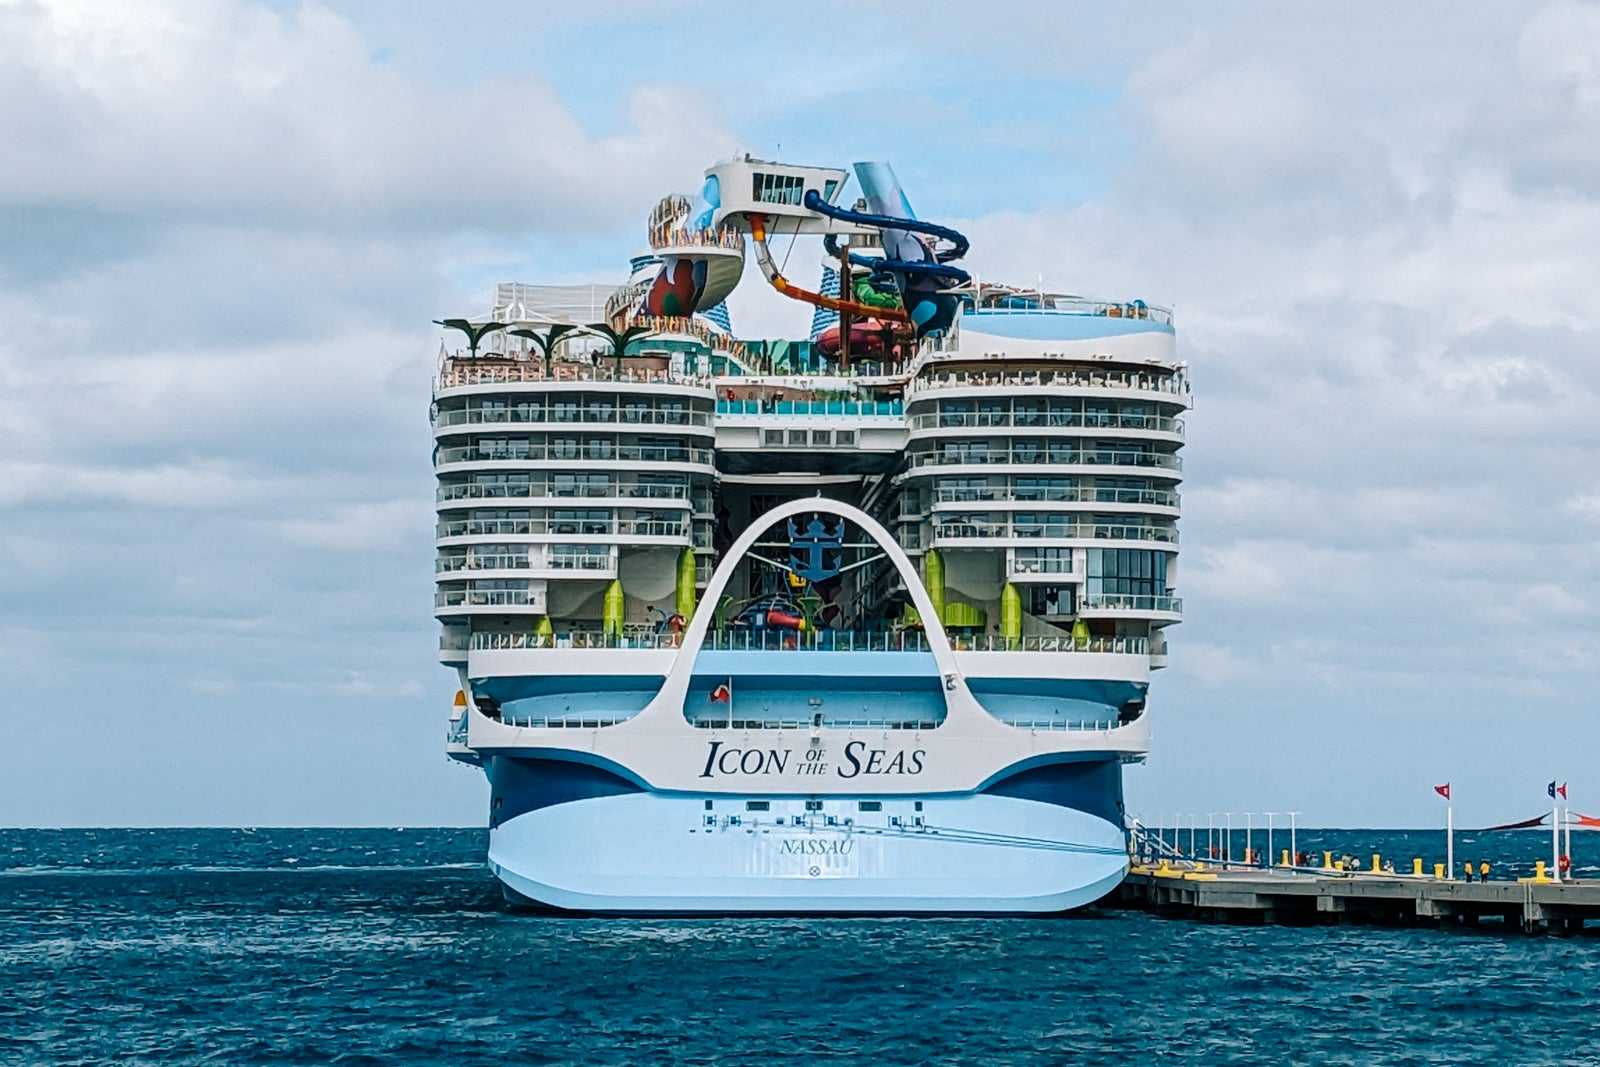 First impressions of Royal Caribbean's Icon of the Seas, the new